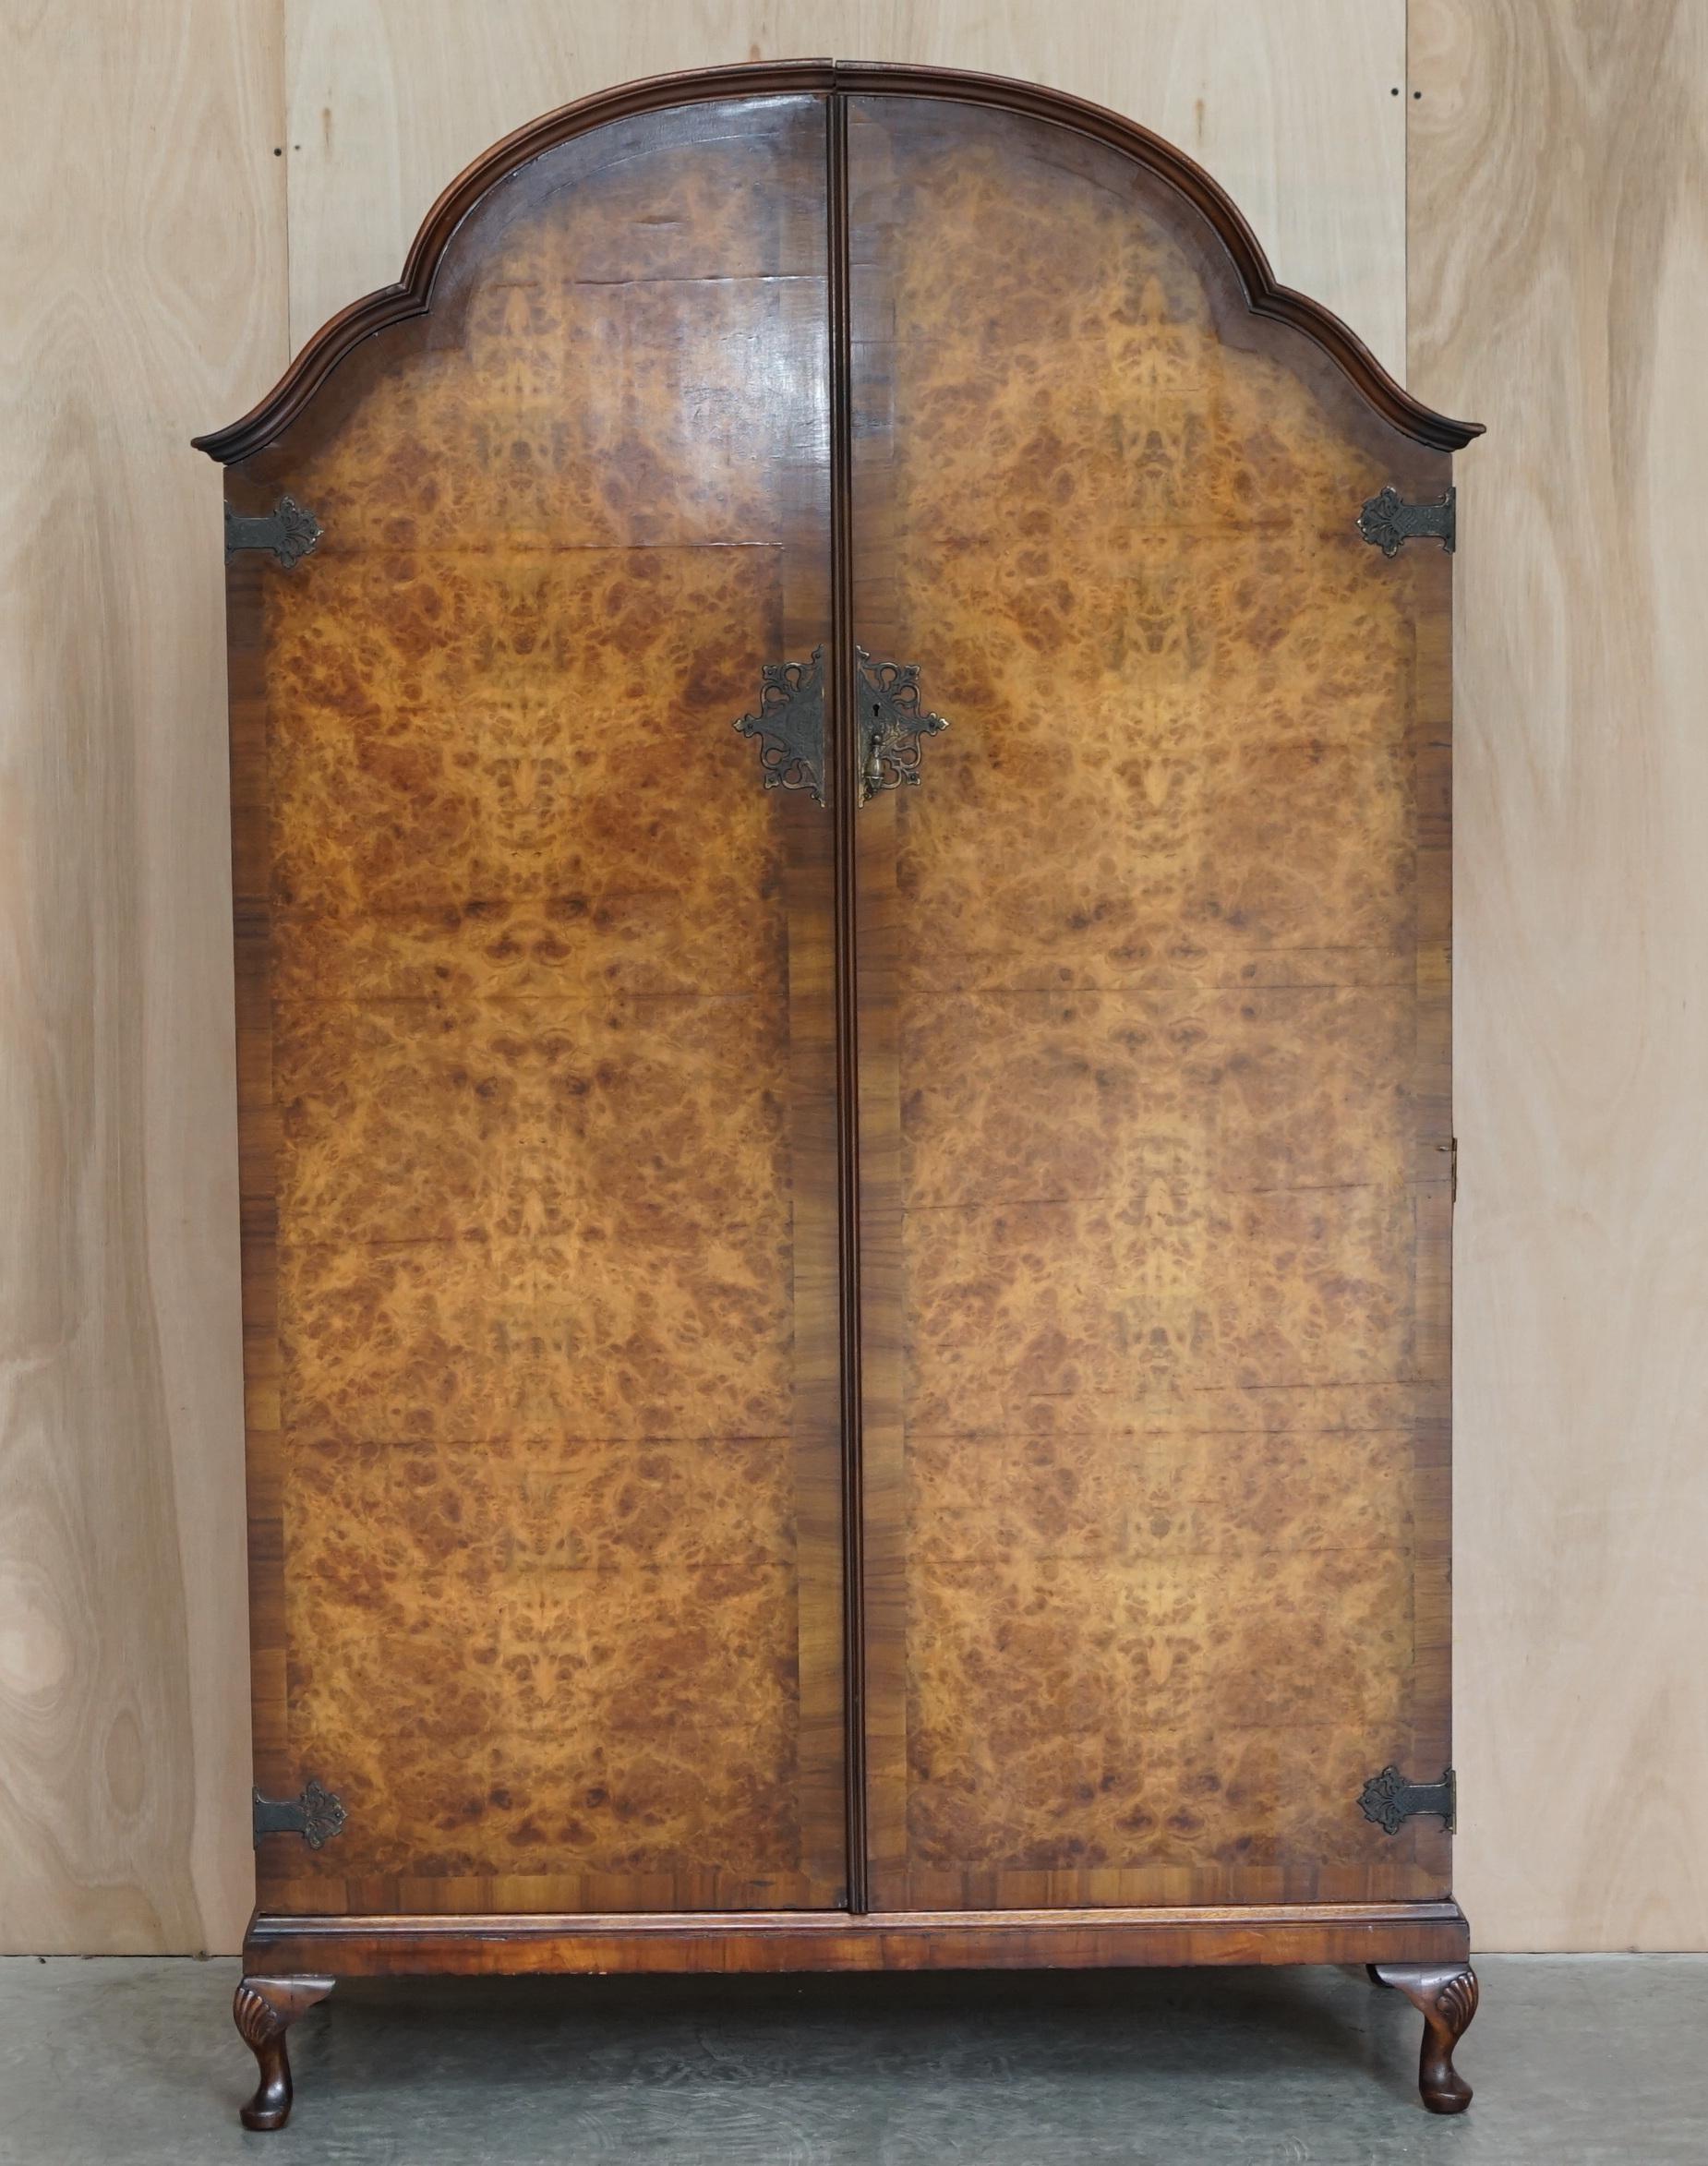 We are delighted to offer for sale this very decorative Burr Walnut vintage circa 1930’s large double wardrobe

A very good looking and well made wardrobe, this one was specially designed to split right down the middle in two easy to transport and